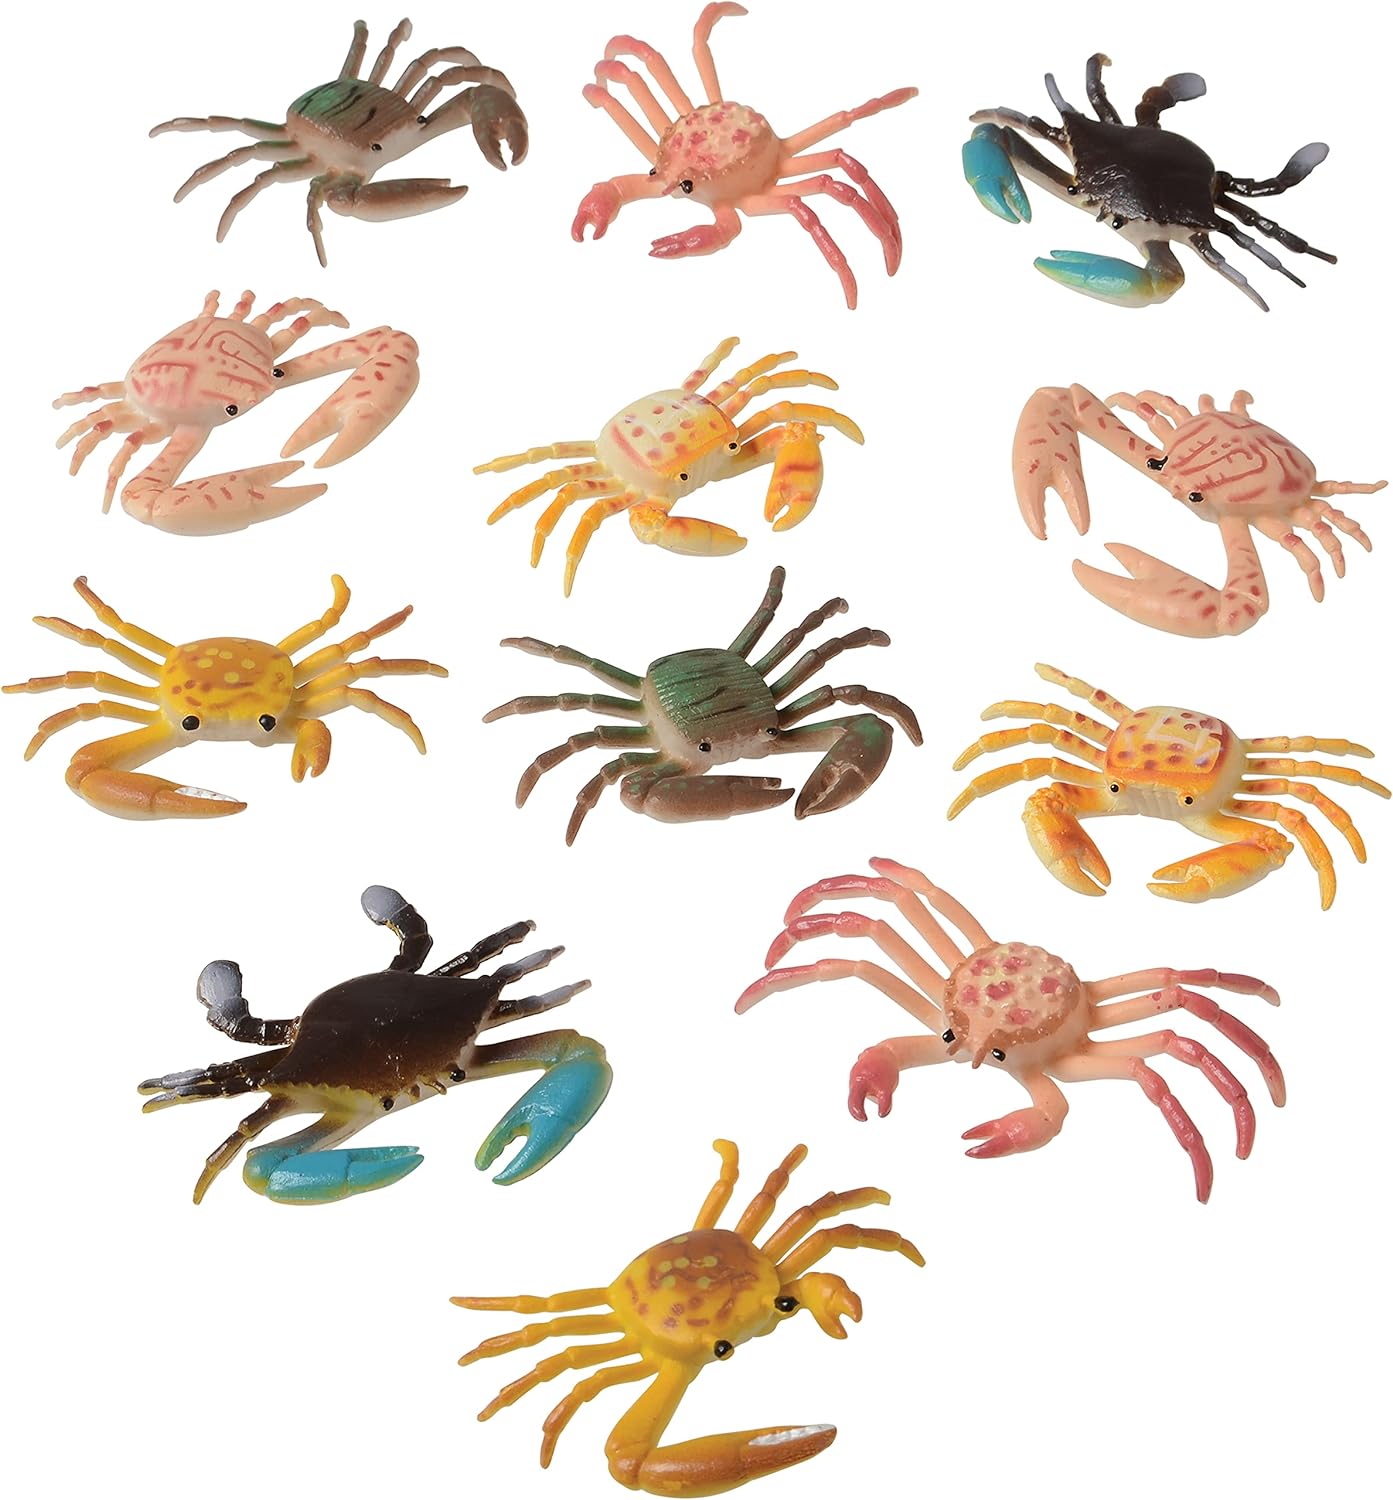 US Toy Plastic Toy Crabs Action Figure  #1621, Pack of 12